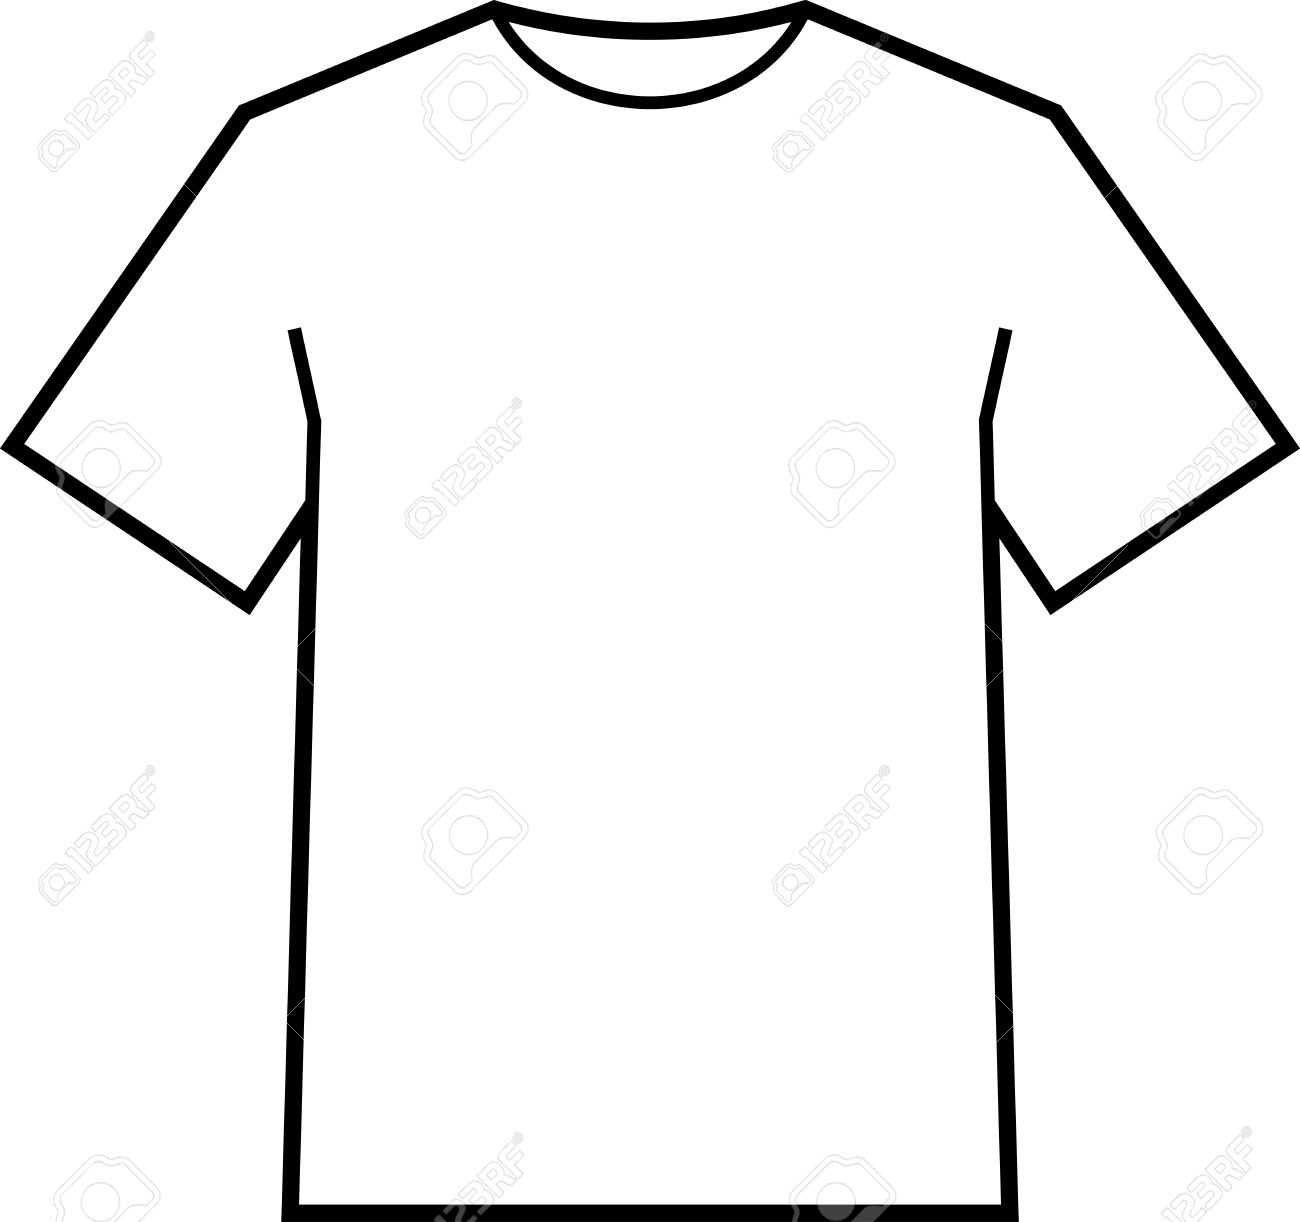 Blank T Shirt Template Vector Intended For Blank Tee Shirt Template